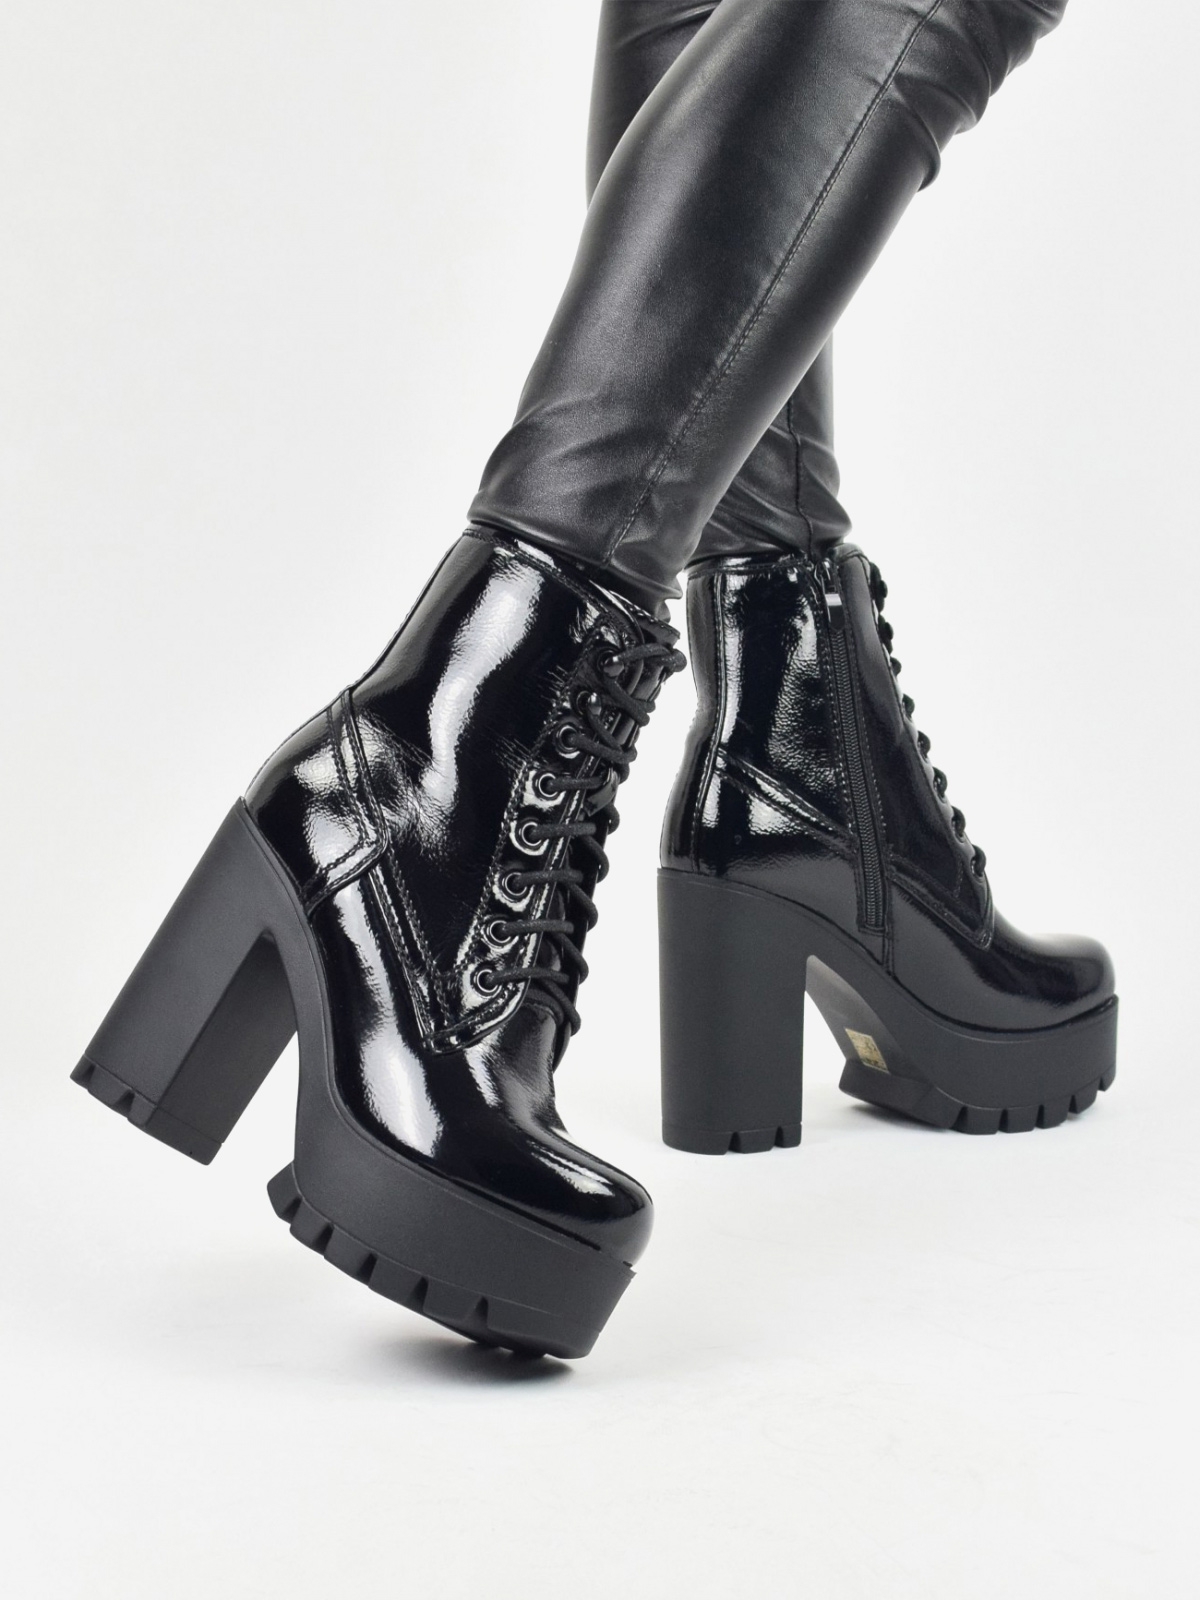 Women's high-heeled boots with platform in black